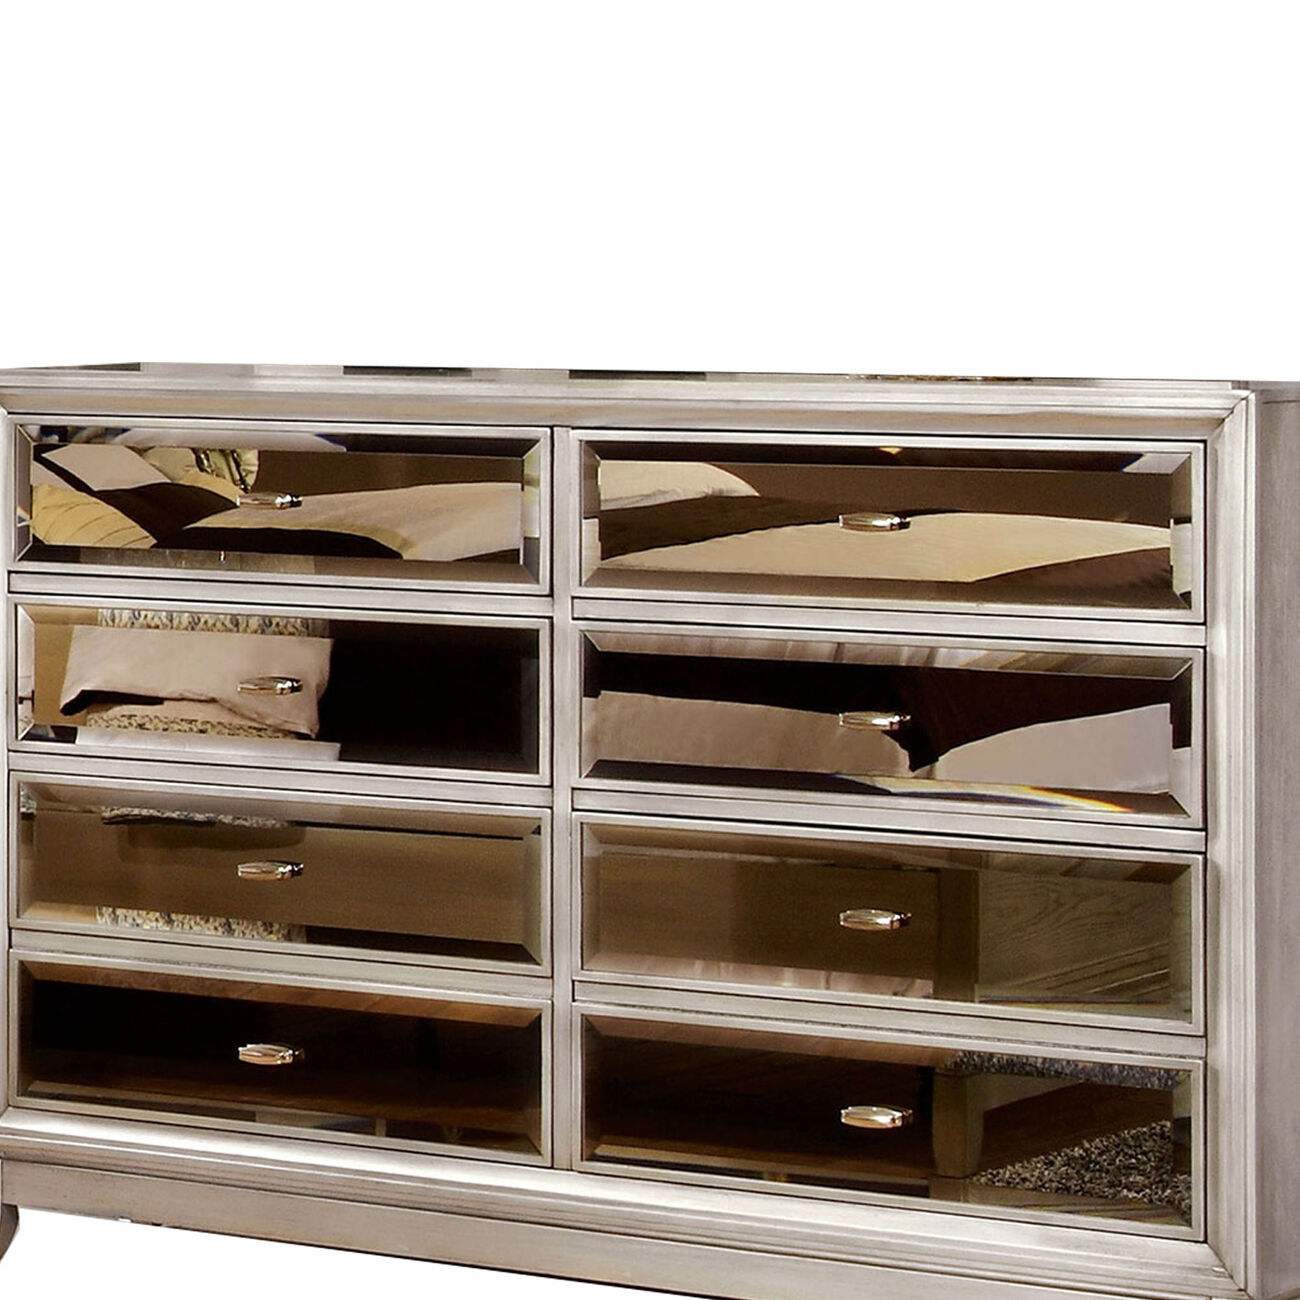 Wooden 8 Drawers Dresser with Beveled Mirror Panels, Silver and Gold